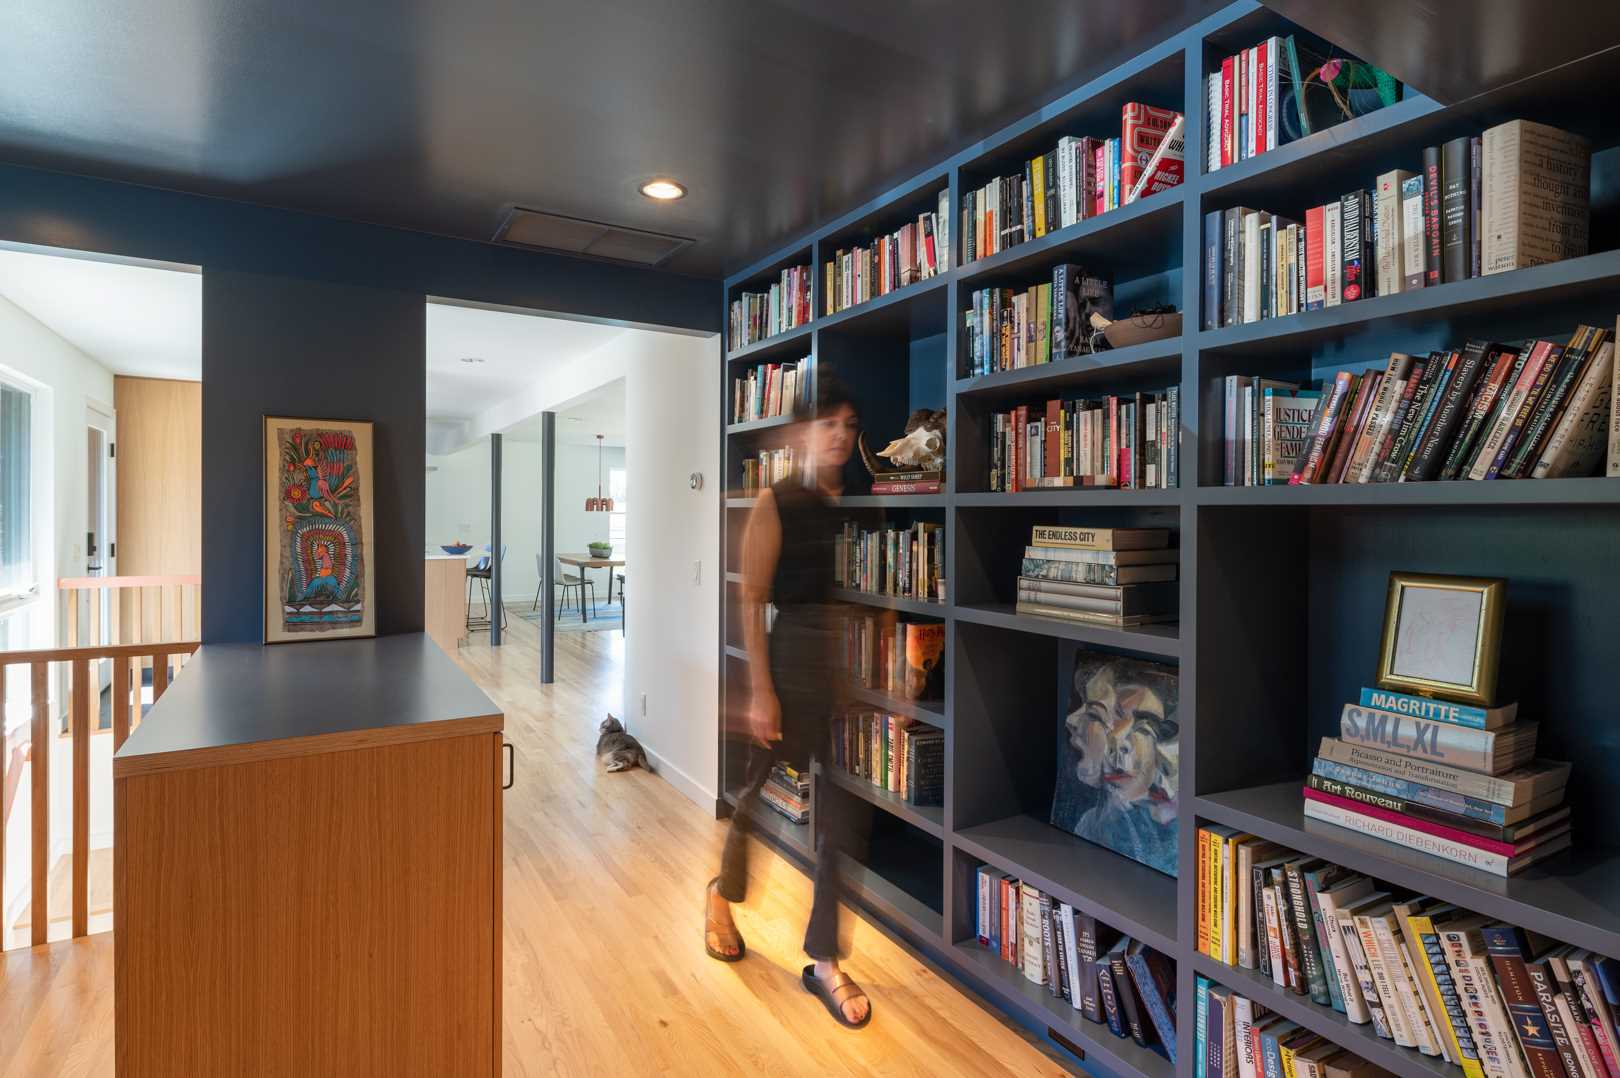 The updated hallway has been transformed into a walk-through library and home office, with plenty of storage for books and a built-in desk beneath the window.